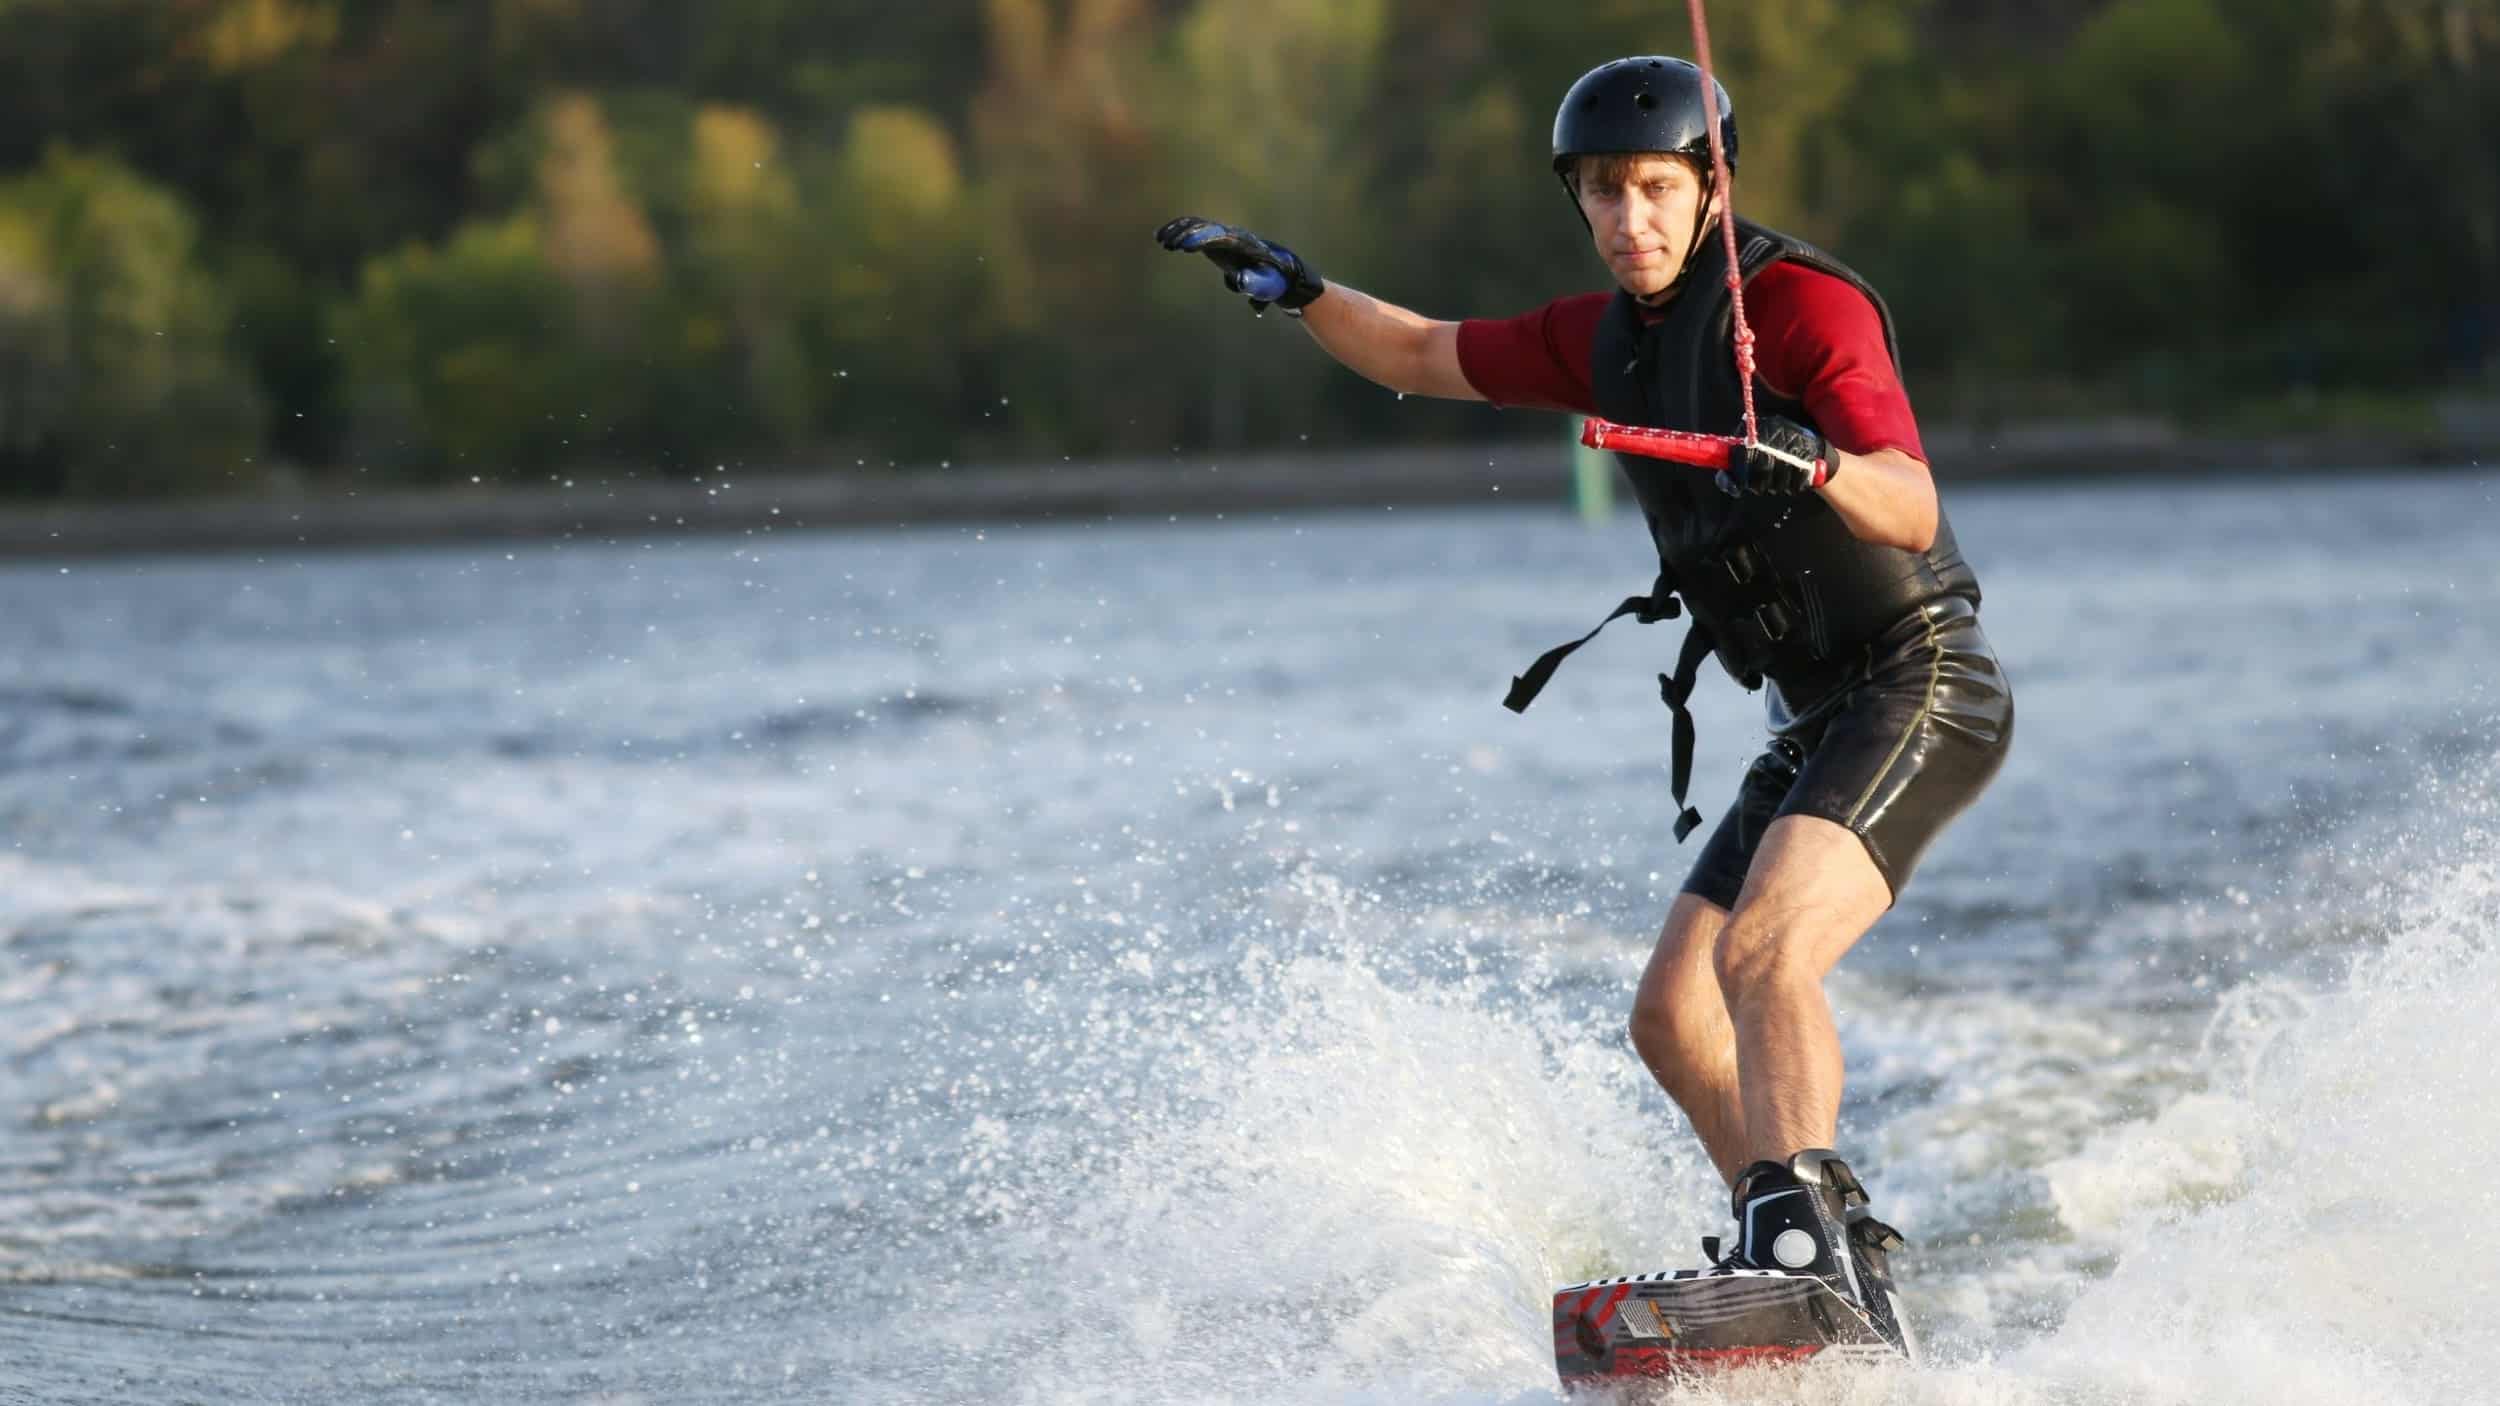 which type of water sport is best